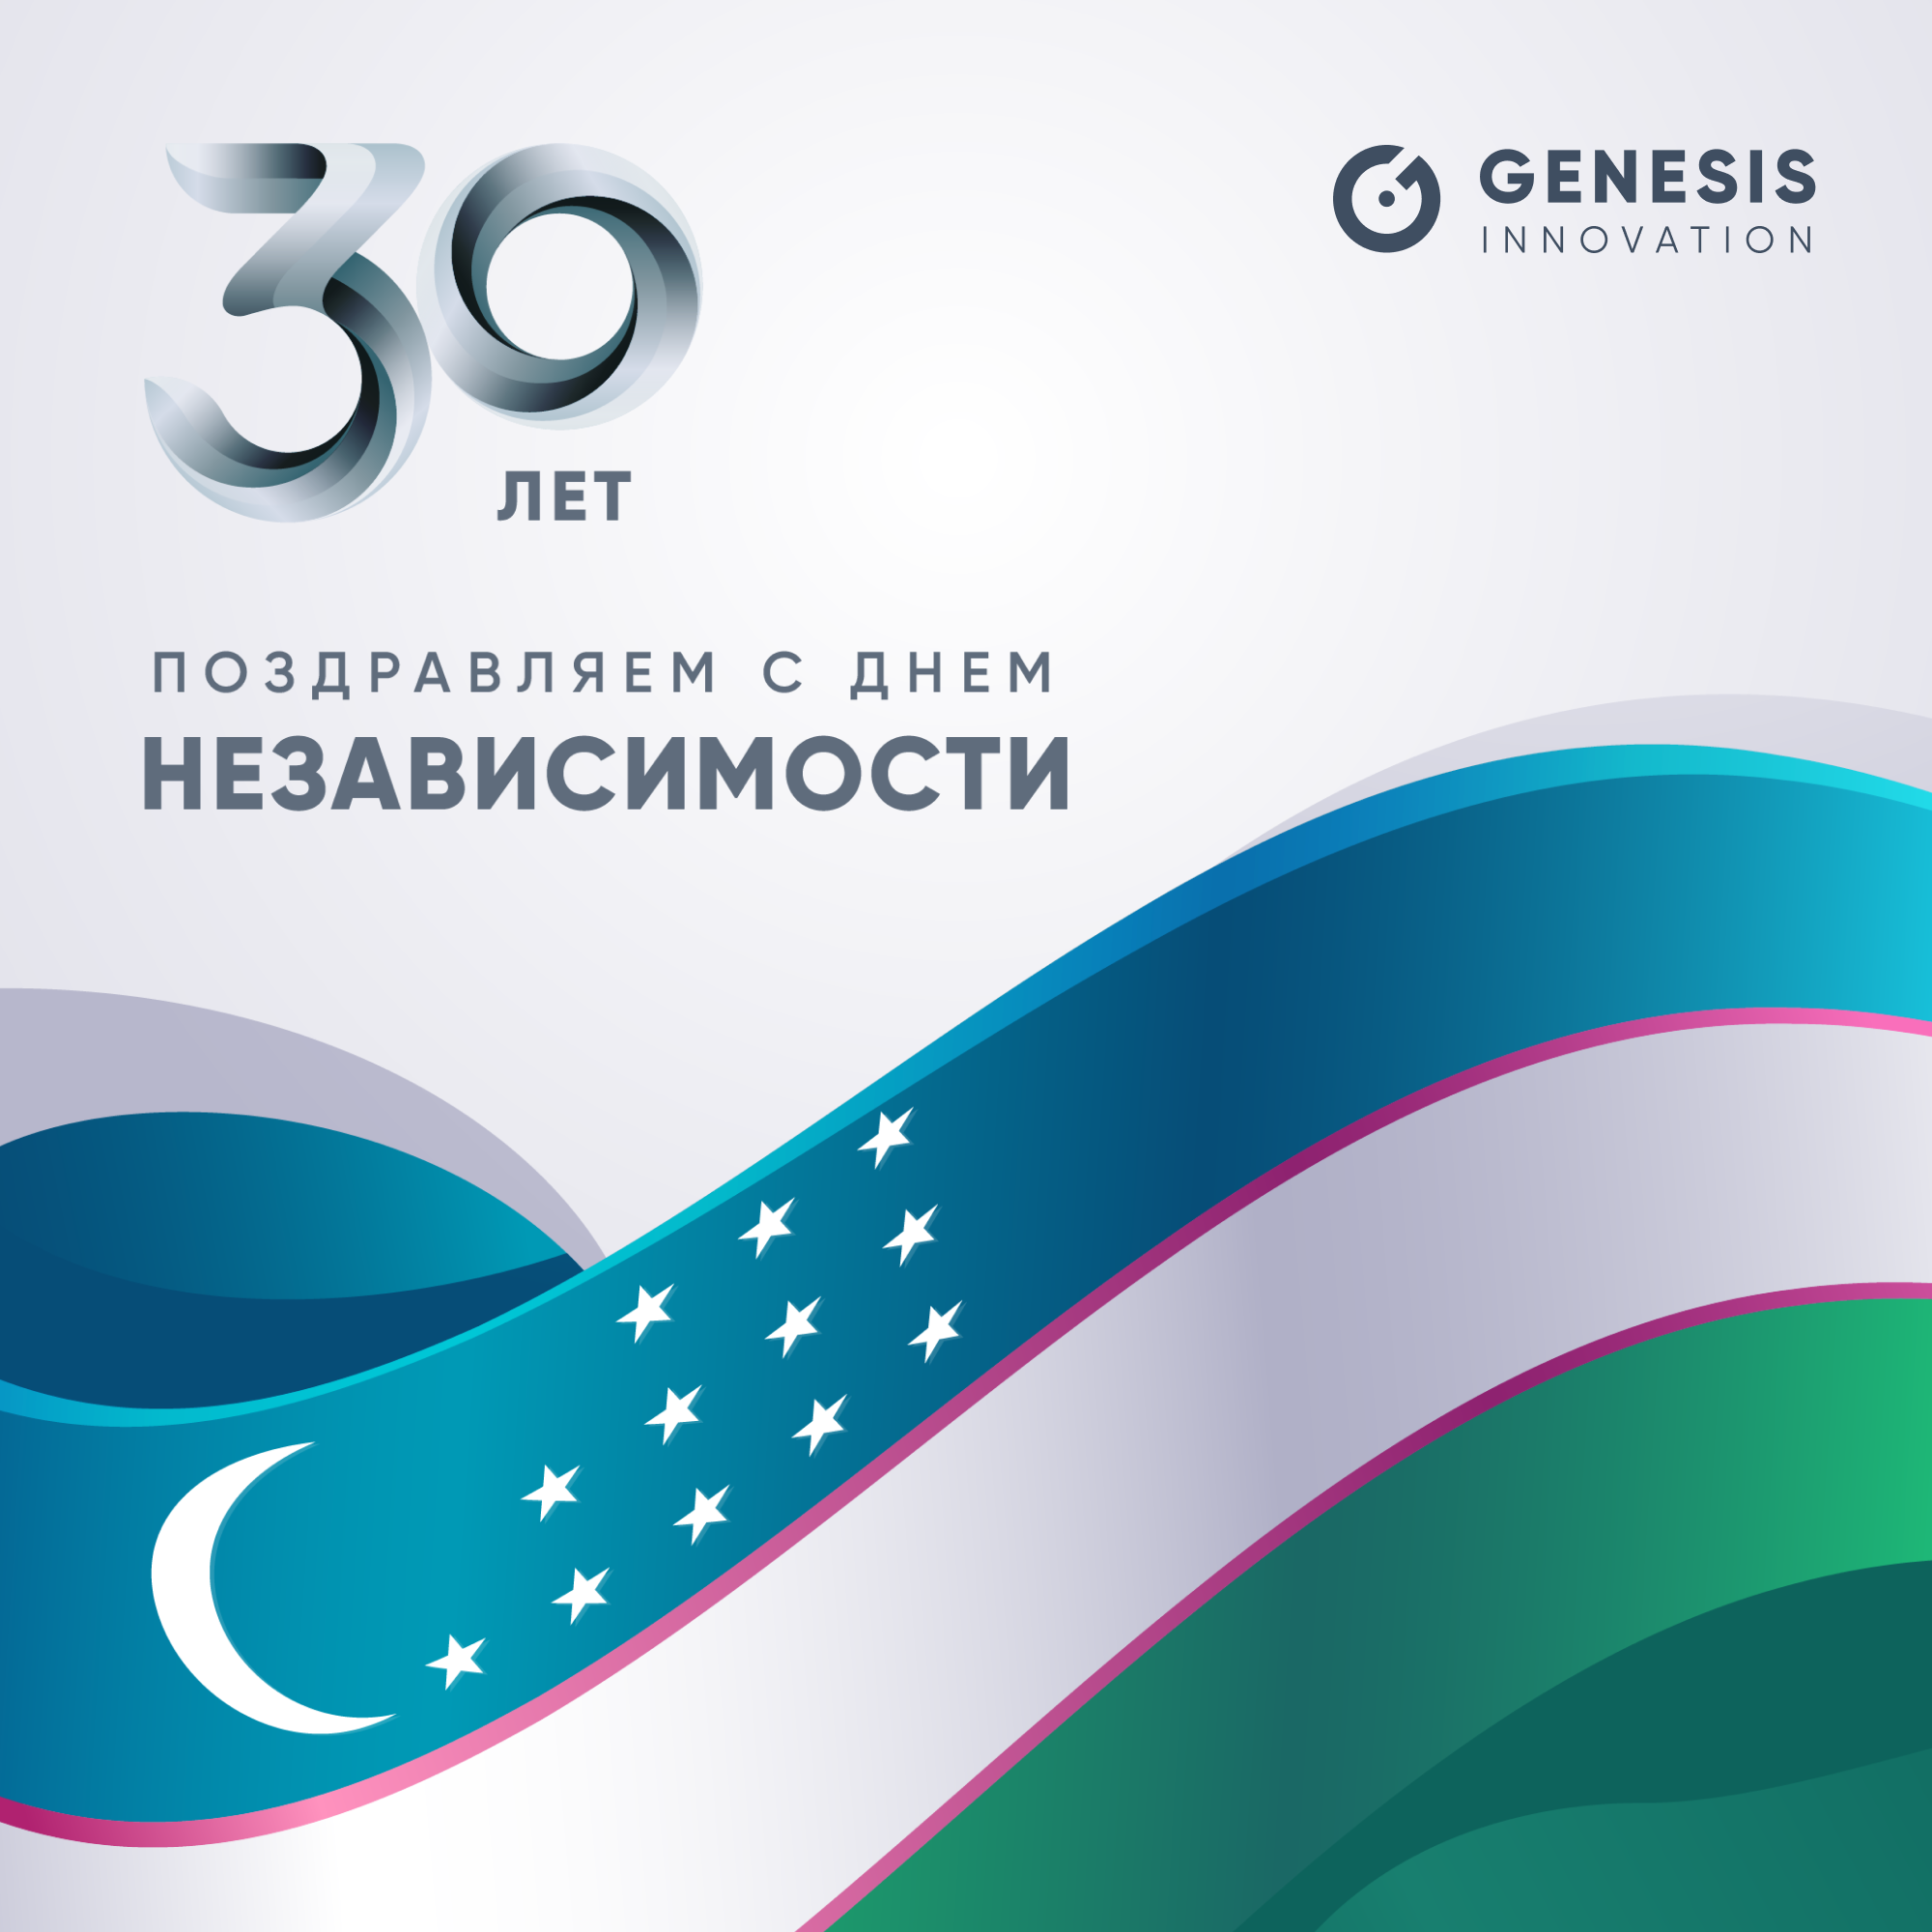 Genesis Innovation congratulates on the Independence Day of the Republic of Uzbekistan!